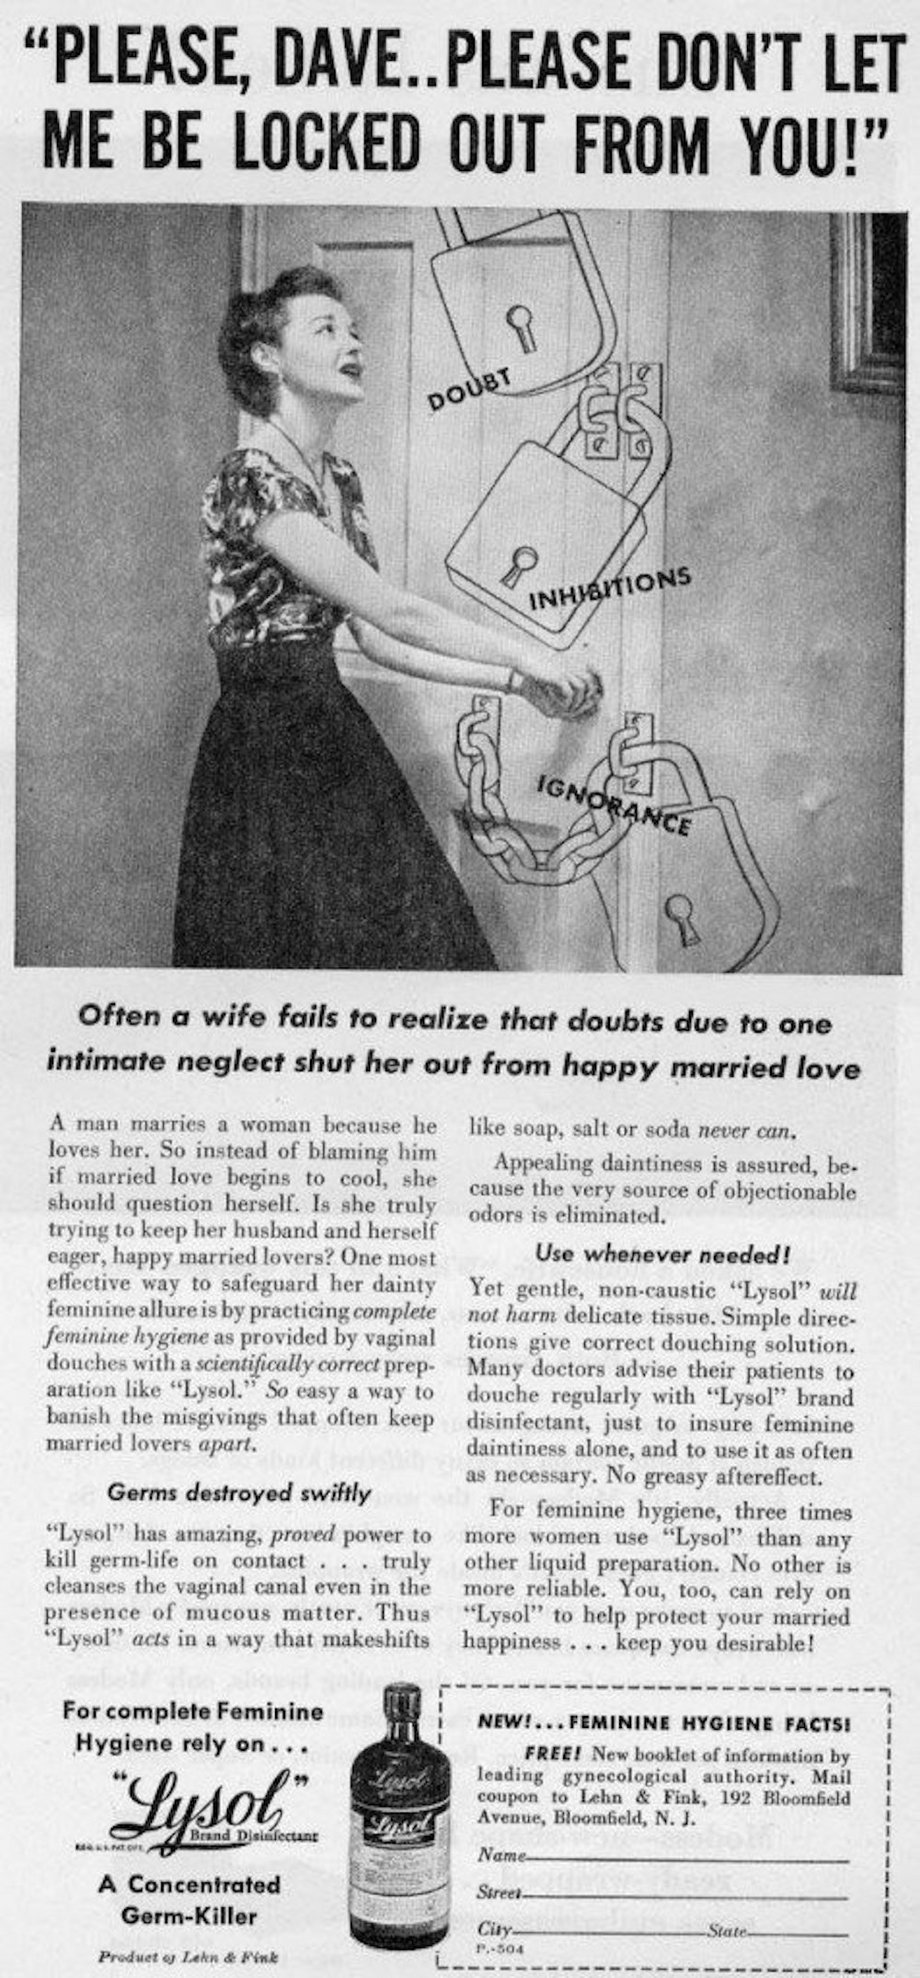 Lysol portrayed women as full of "doubt," "ignorance," and "inhibitions."